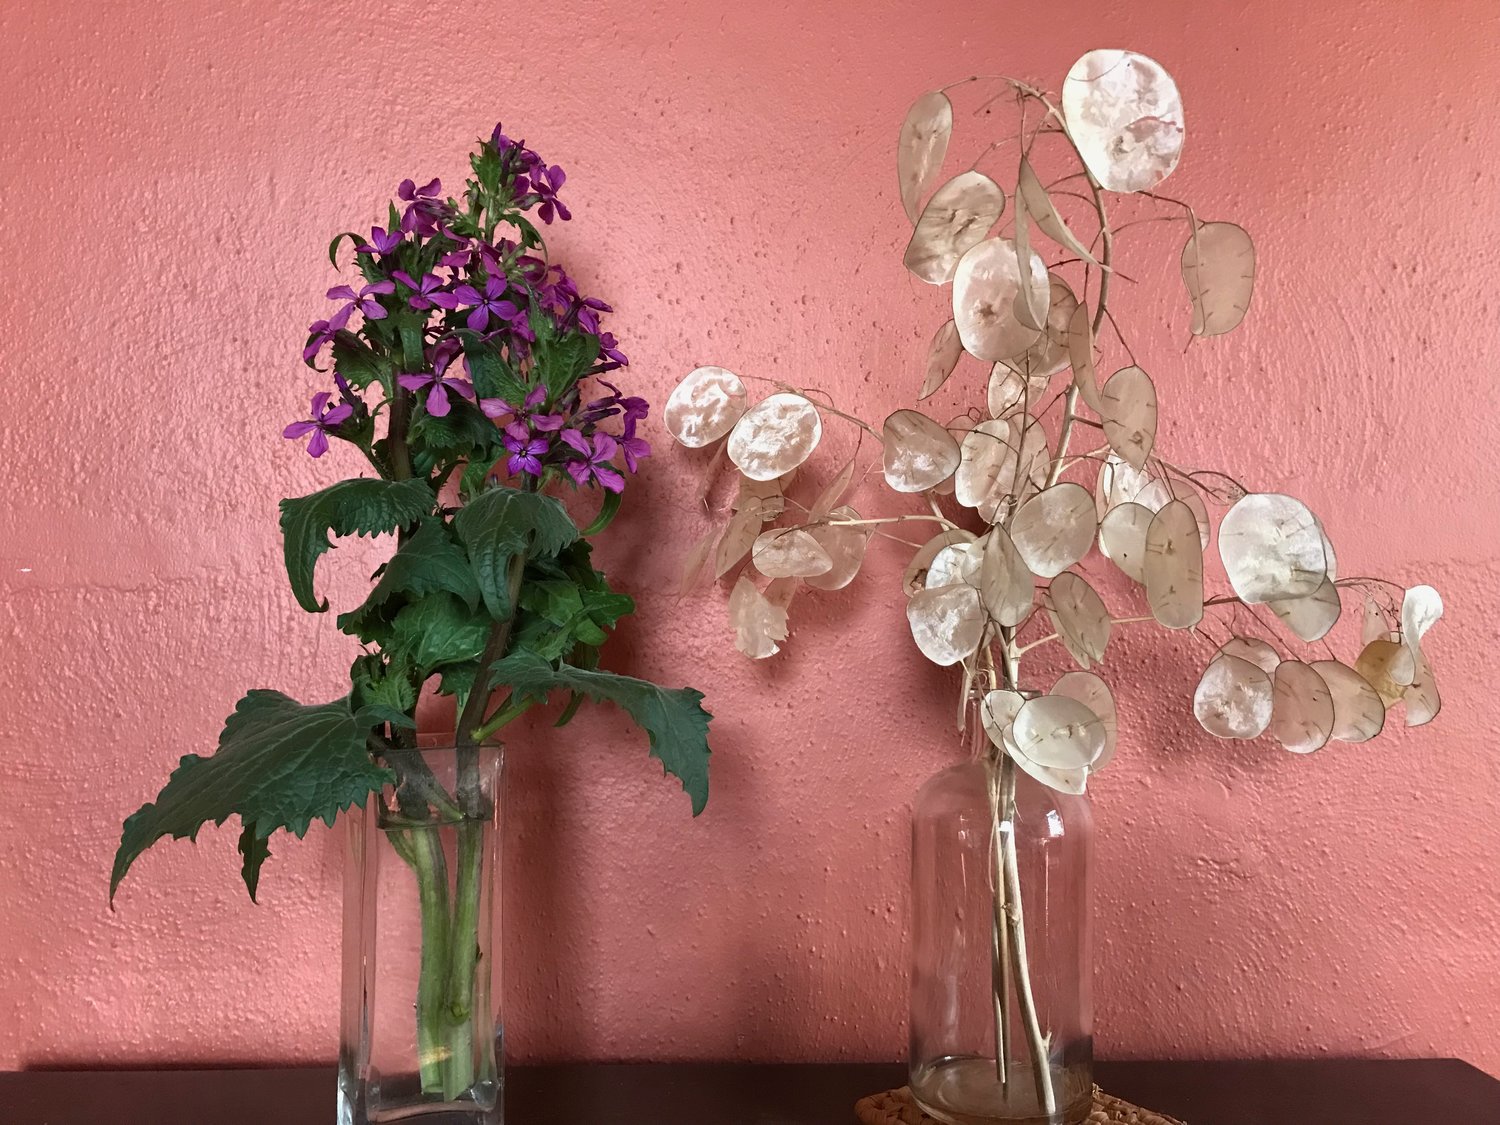 On the left, Lunaria flowers, now in bloom; on the right, their decorative dried seed cases from last fall. They are named for their resemblance to the moon, but also called money plant for their resemblance to silver dollars.